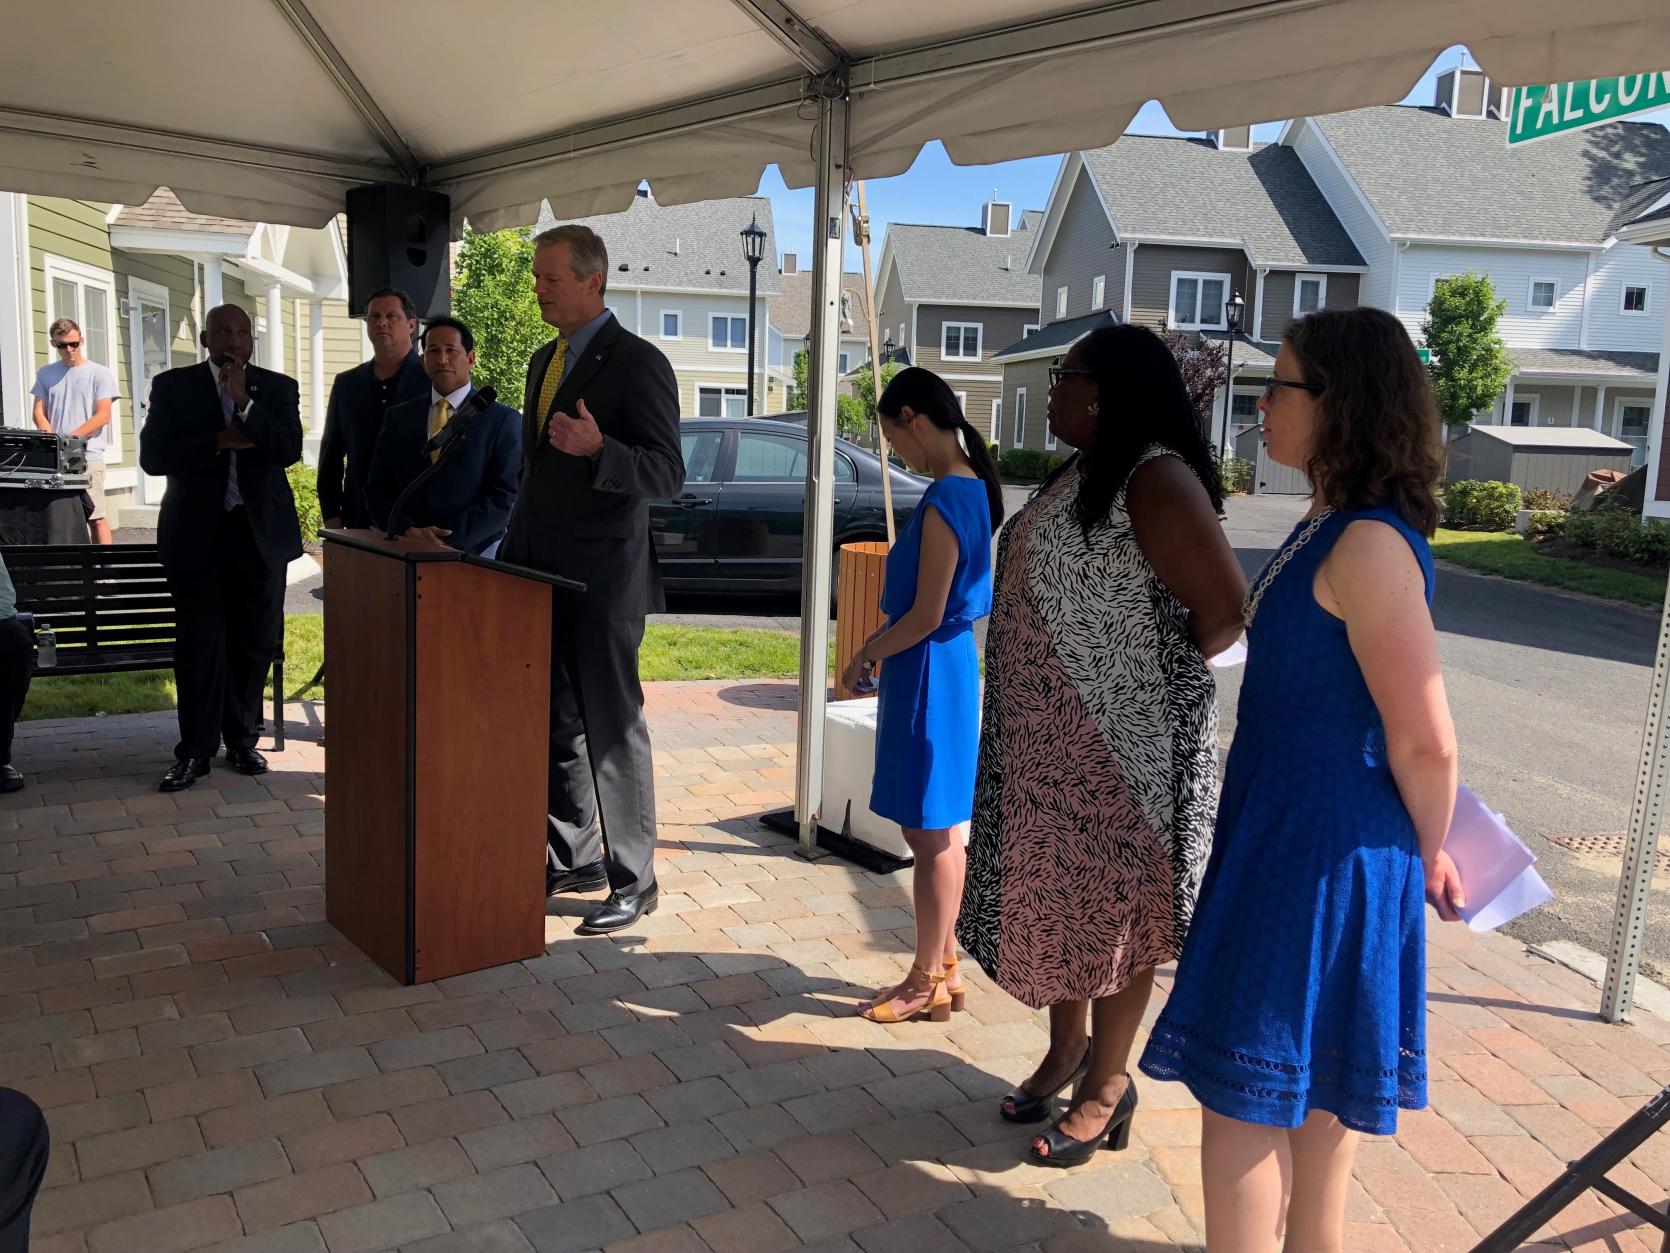 Baker-Polito Administration Announces $86 Million Investment in Workforce Housing